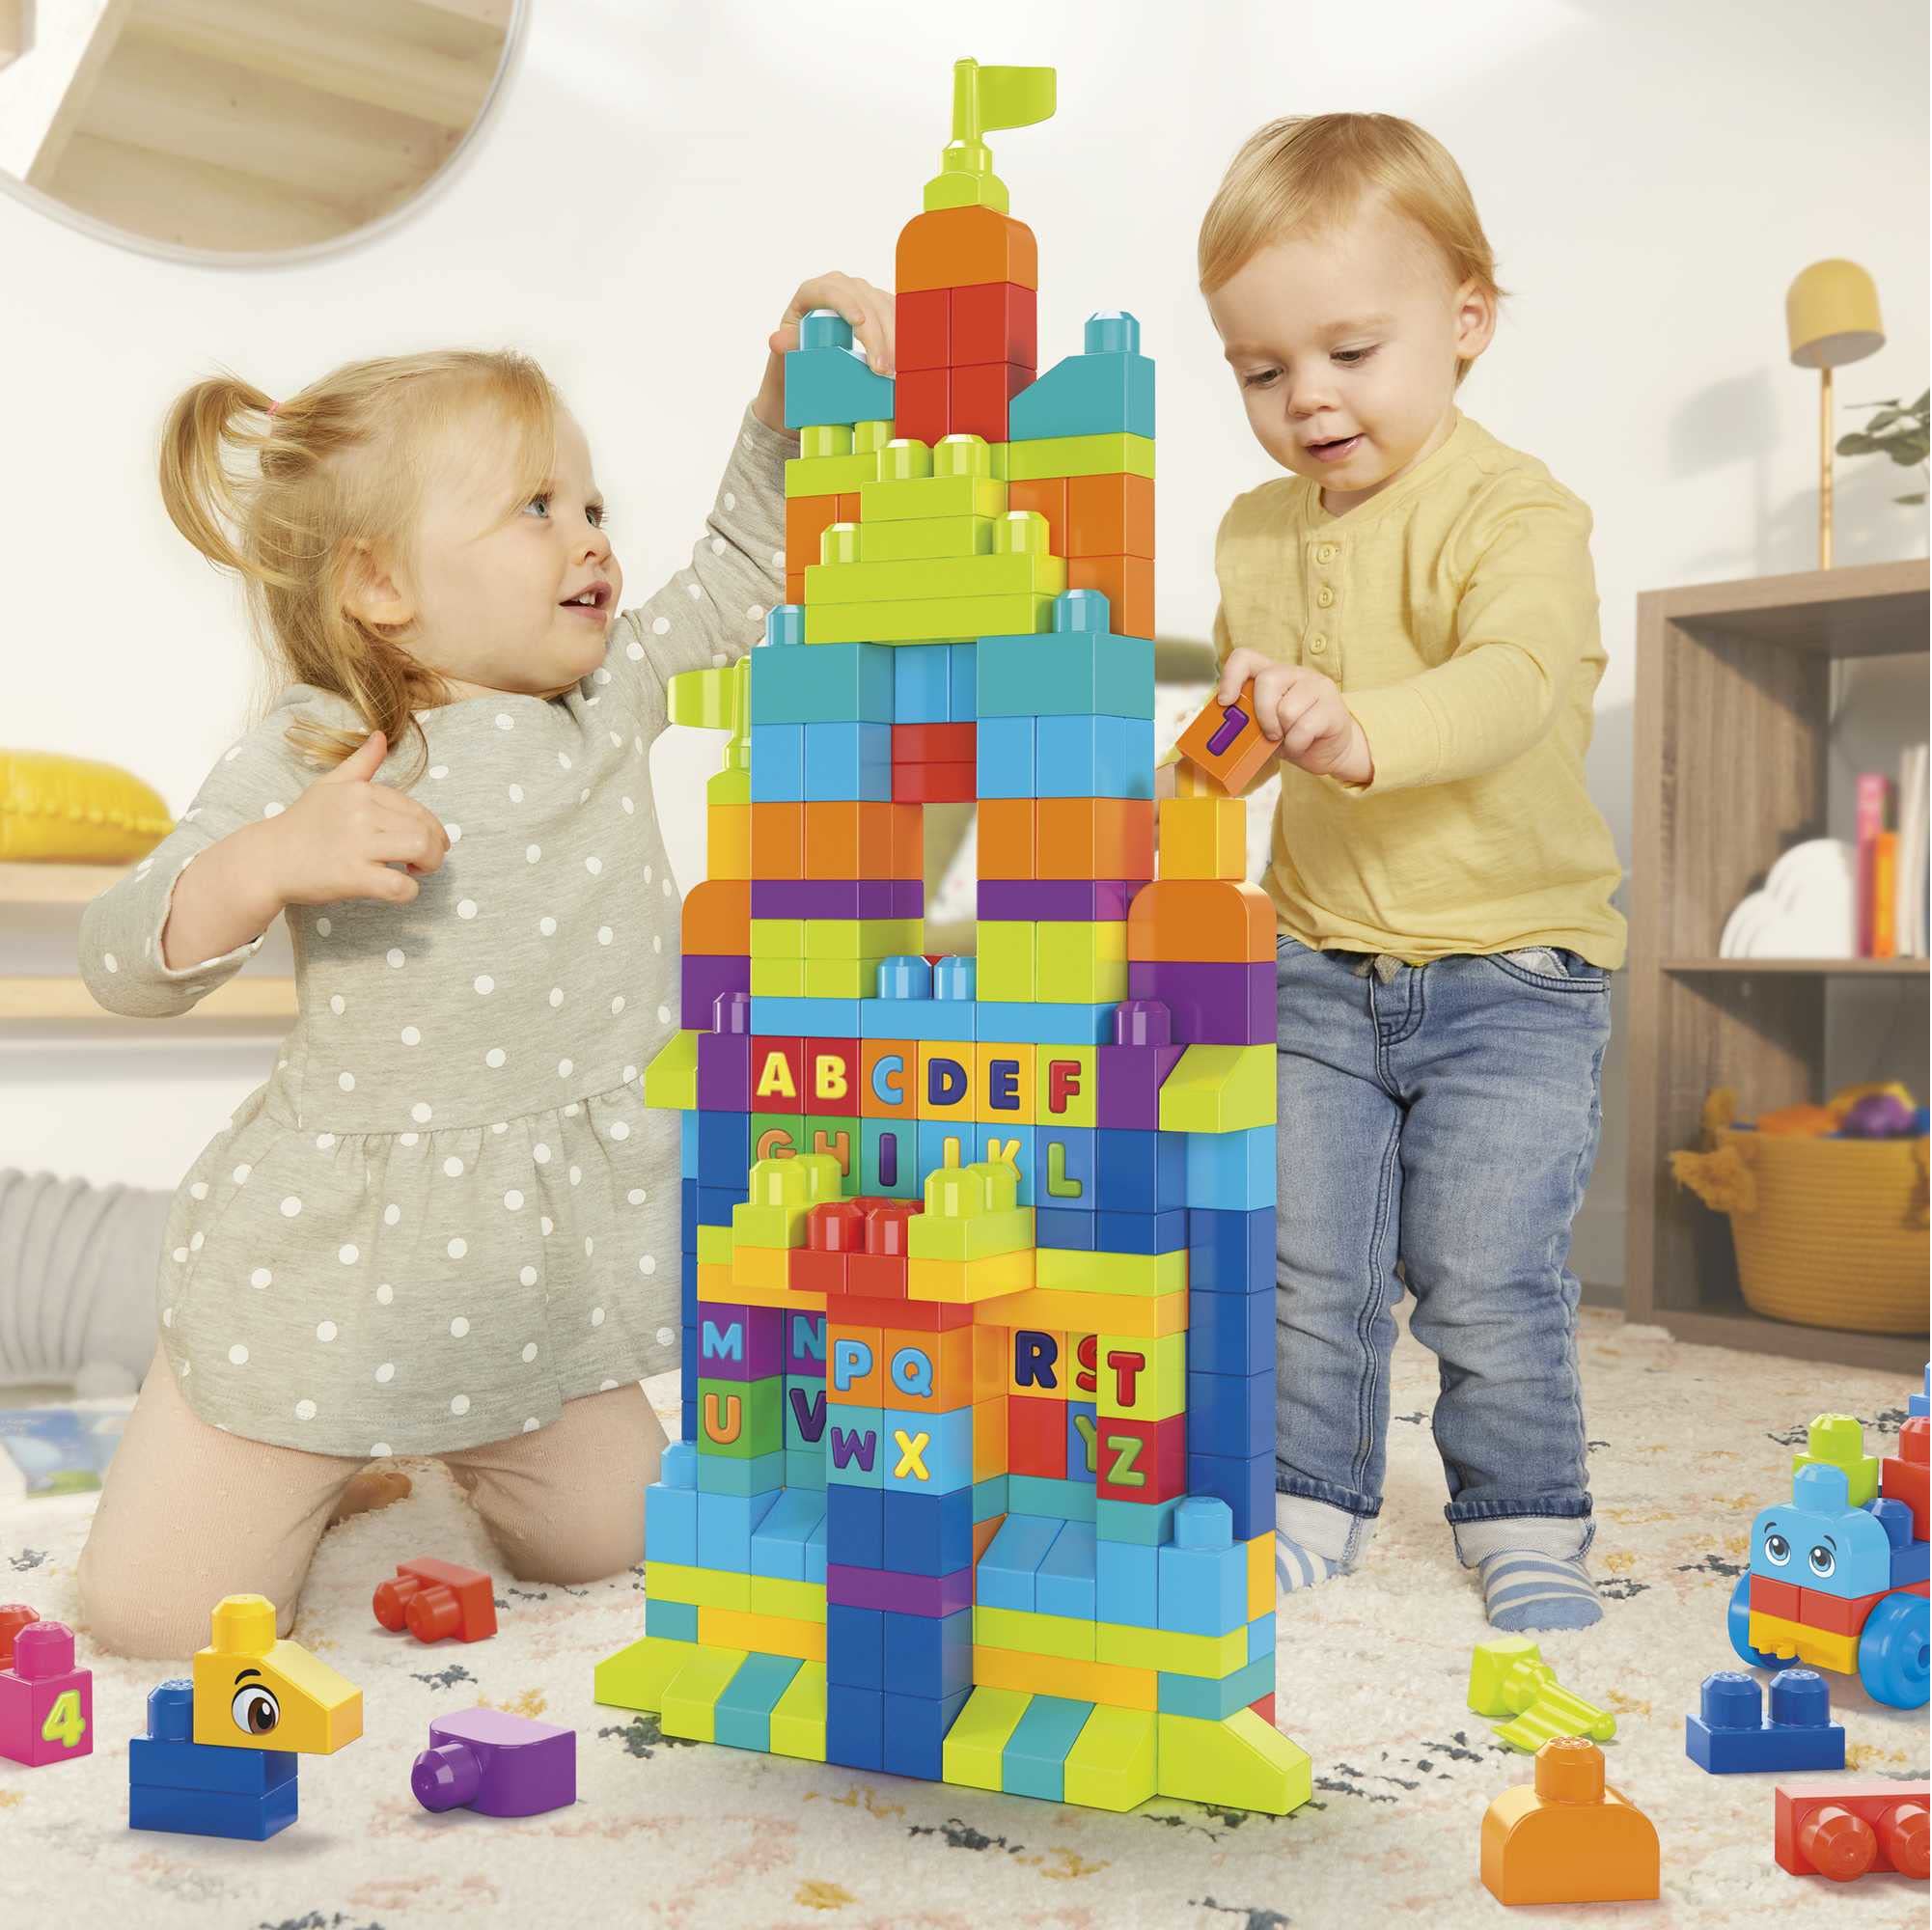 MEGA BLOKS Fisher-Price Toddler Block Toys, Even Bigger Building Bag with 300 Pieces and Storage, Gift Ideas for Kids Age 1+ Years